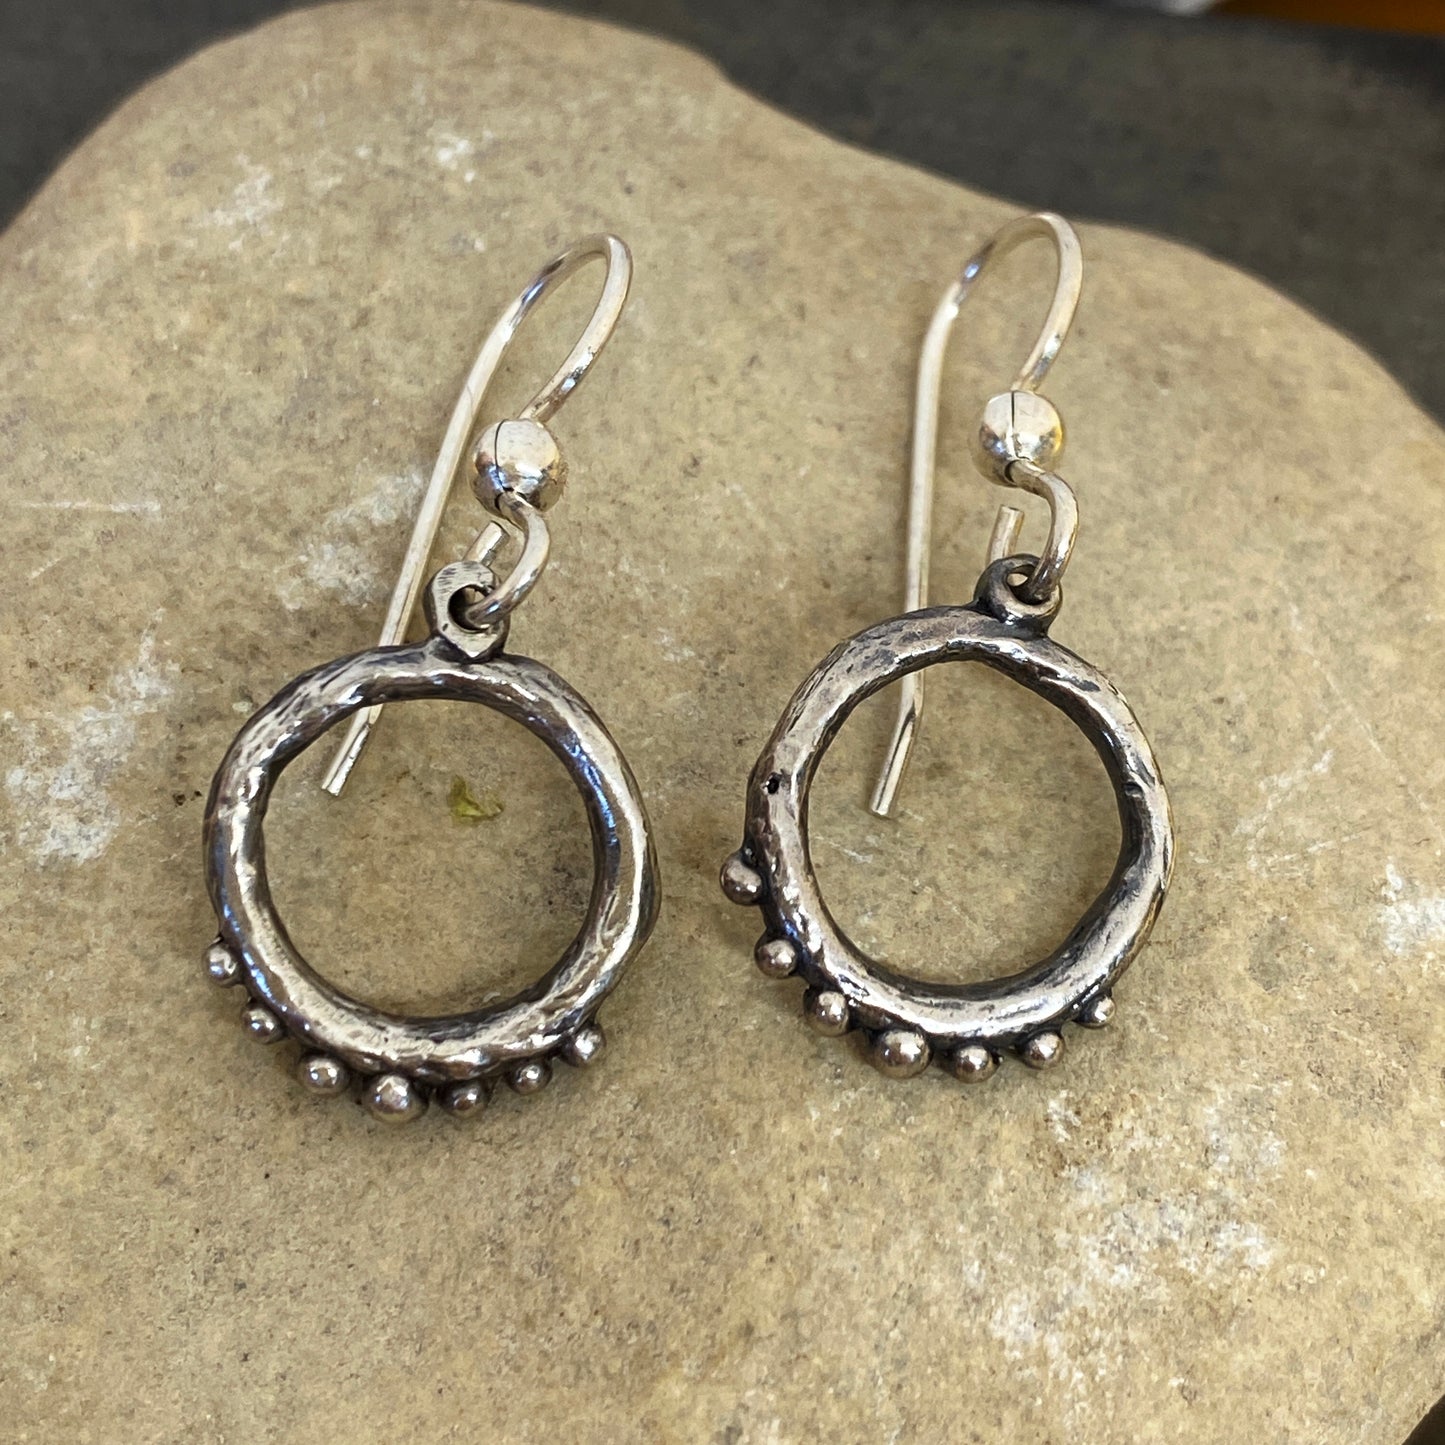 Organic open hoops with ball fringe earrings on French hooks- sterling silver, lost